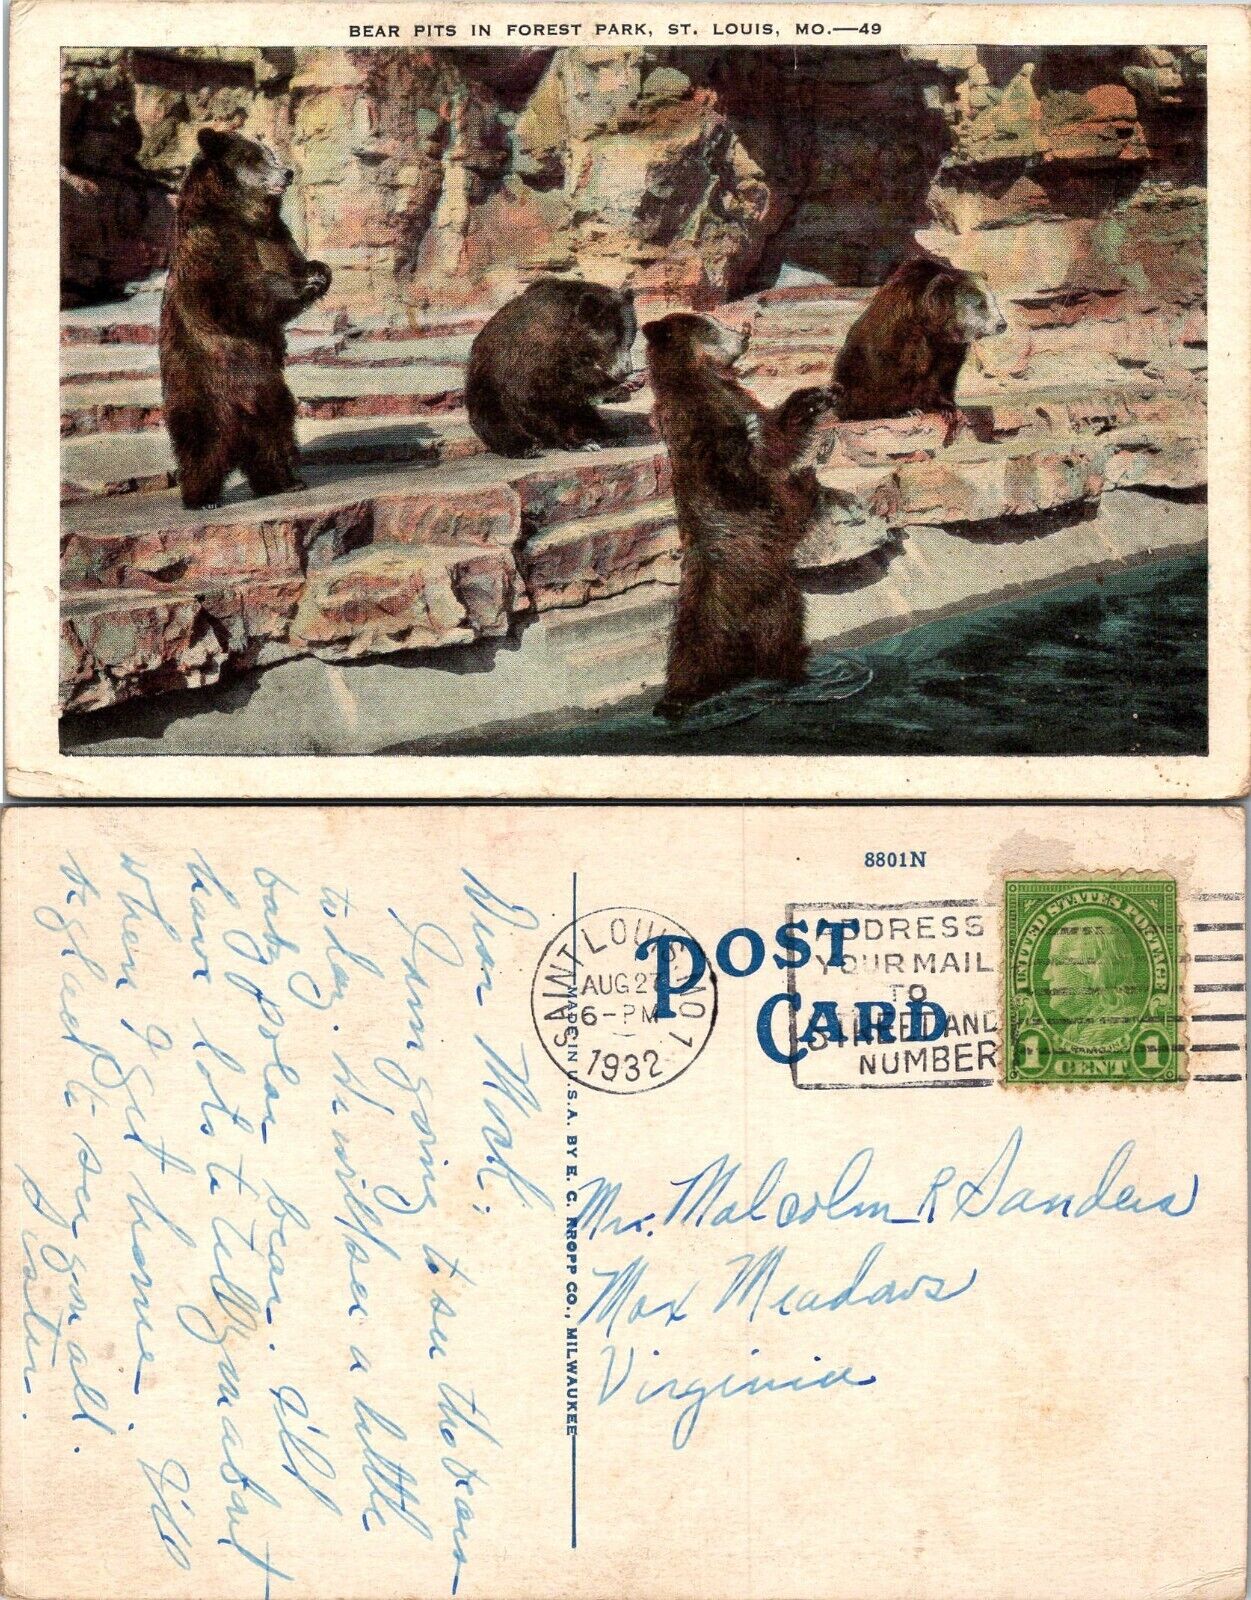 POSTCARD BEAR PITS IN FORREST PARK ST LOUIS MO POSTMARKED 1932